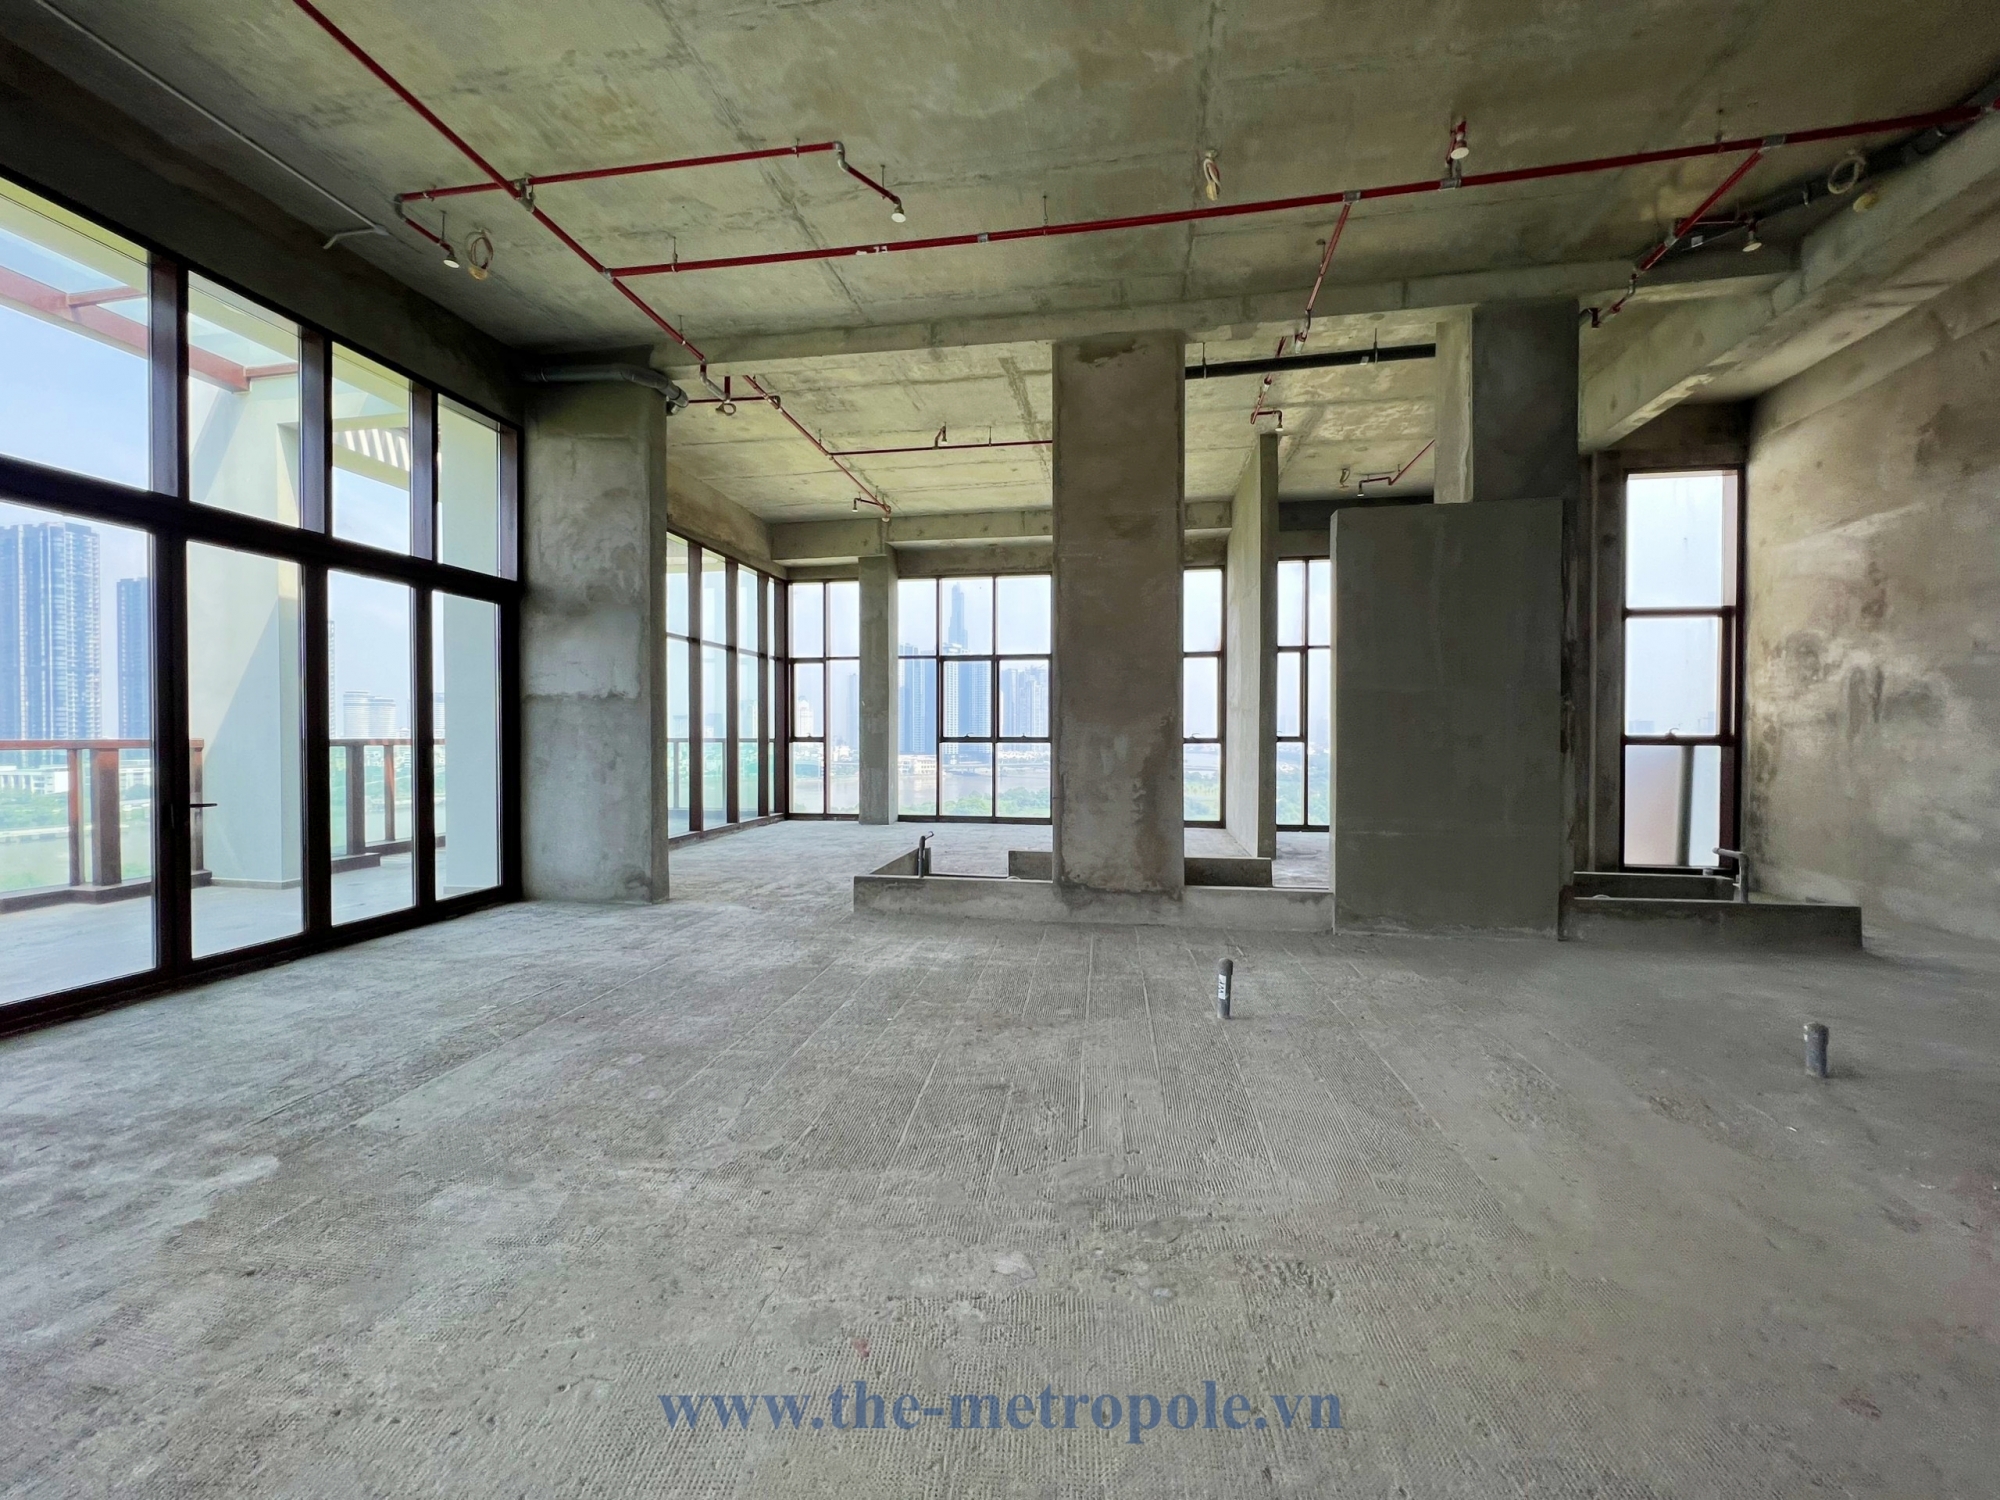 Penthouse for sale in the Metropople Thu Thiem with foreign quota - Saigon river view